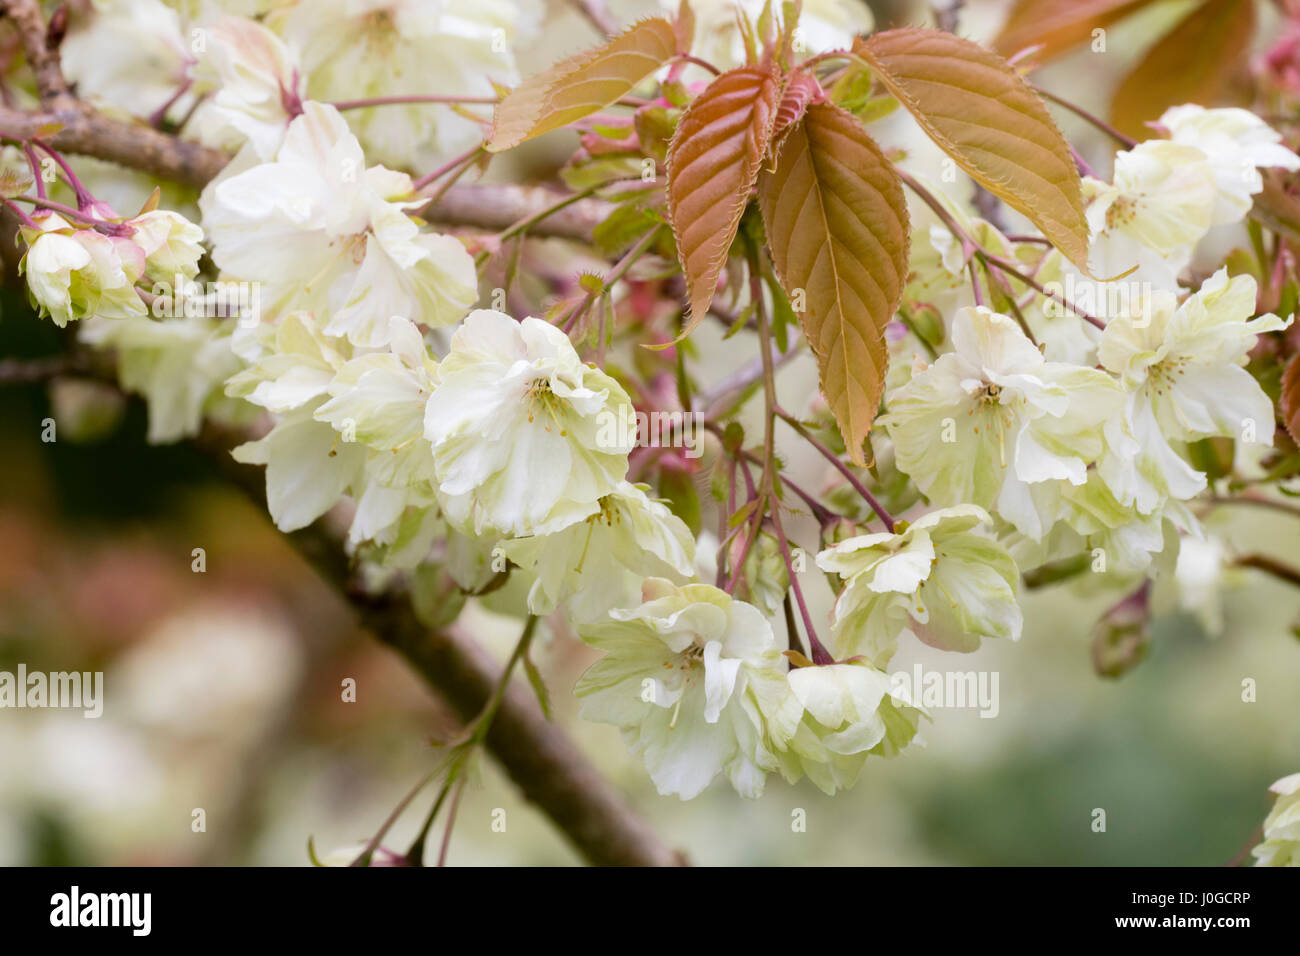 Green tinged white flowers of the ornamental cherry, Prunus 'Gyoiku', contrast with bronzed young foliage Stock Photo